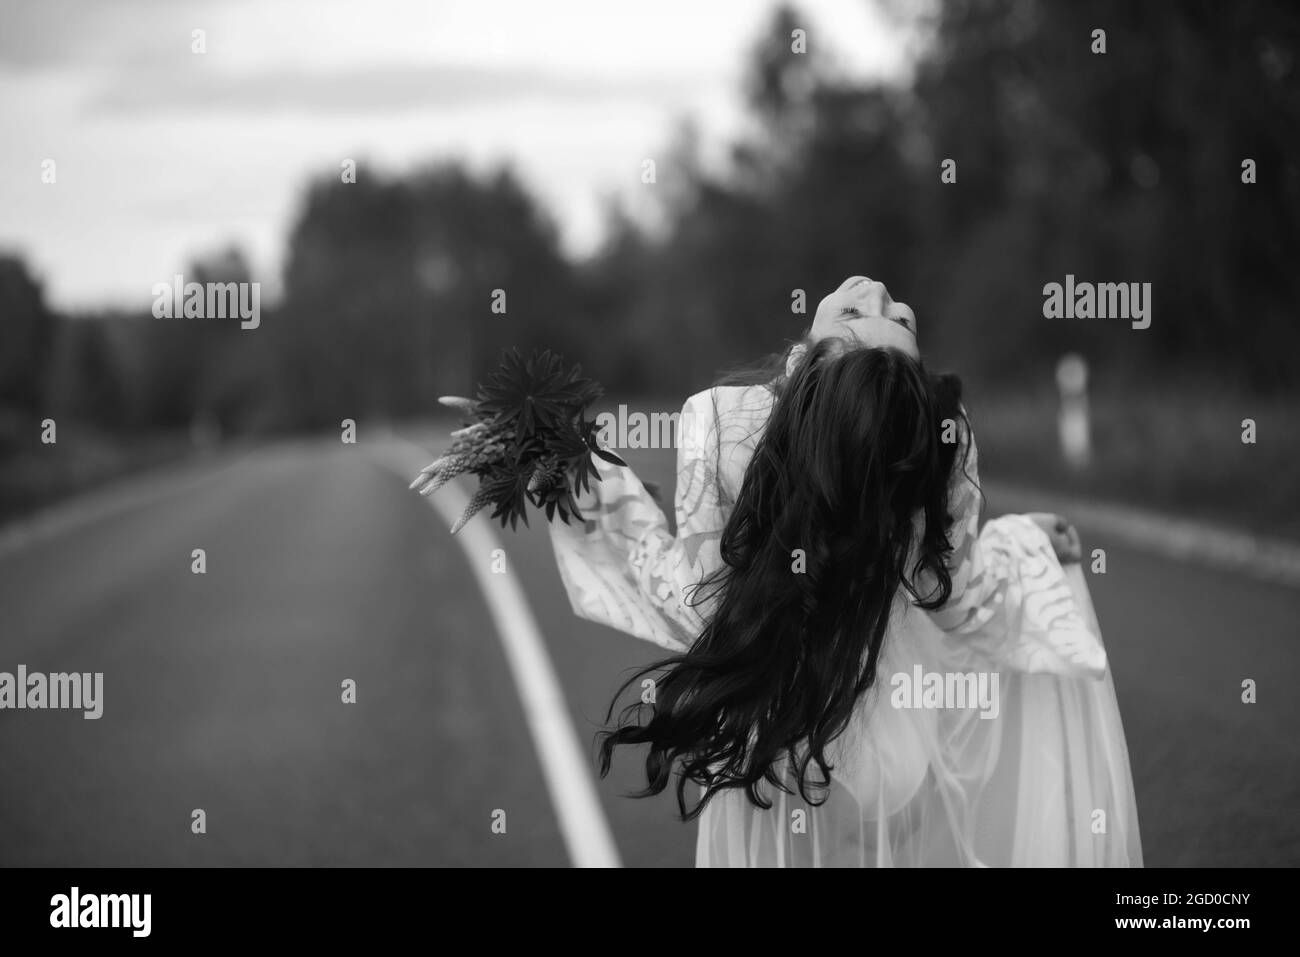 Rear view of a young woman in a white dress running on an asphalt country road Stock Photo